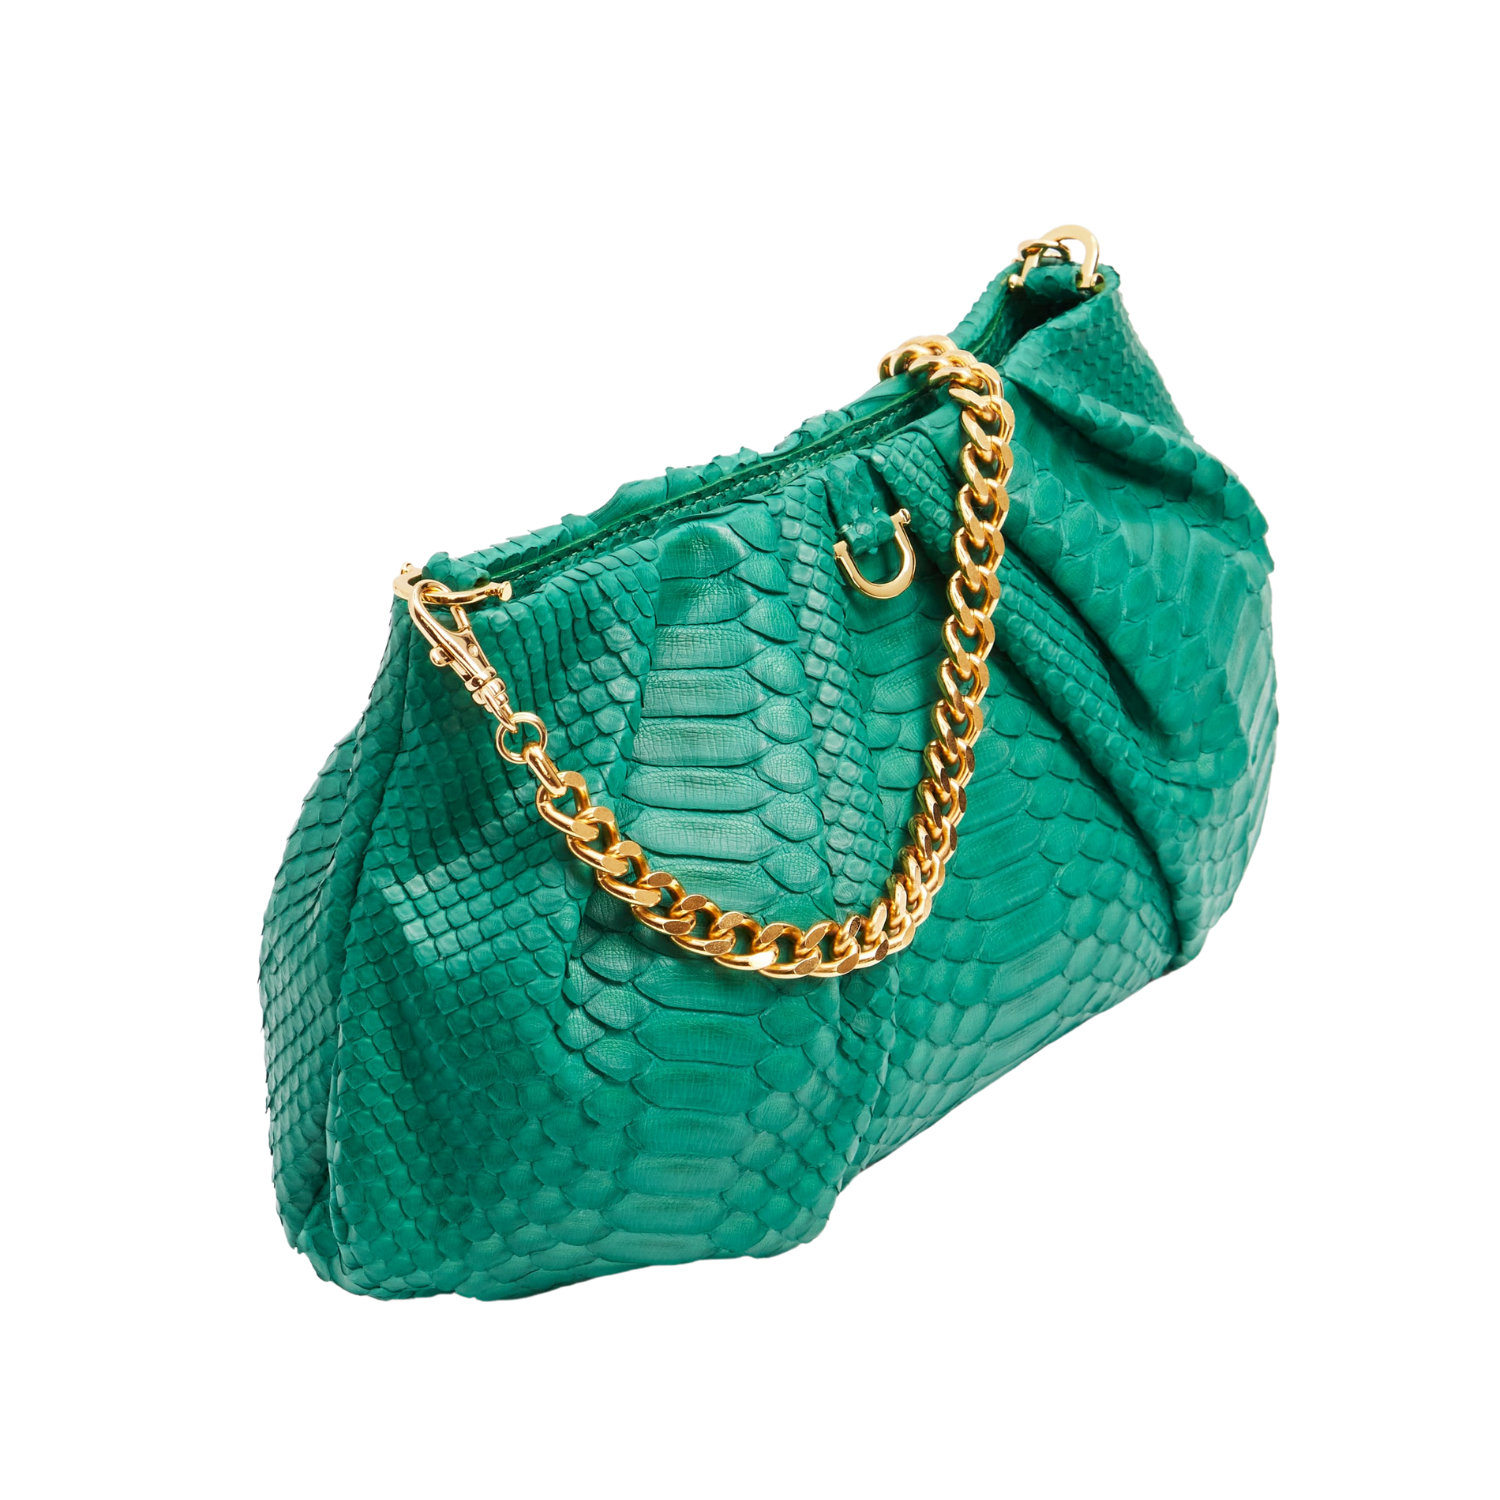 Large Croissant Bag in Green Leather